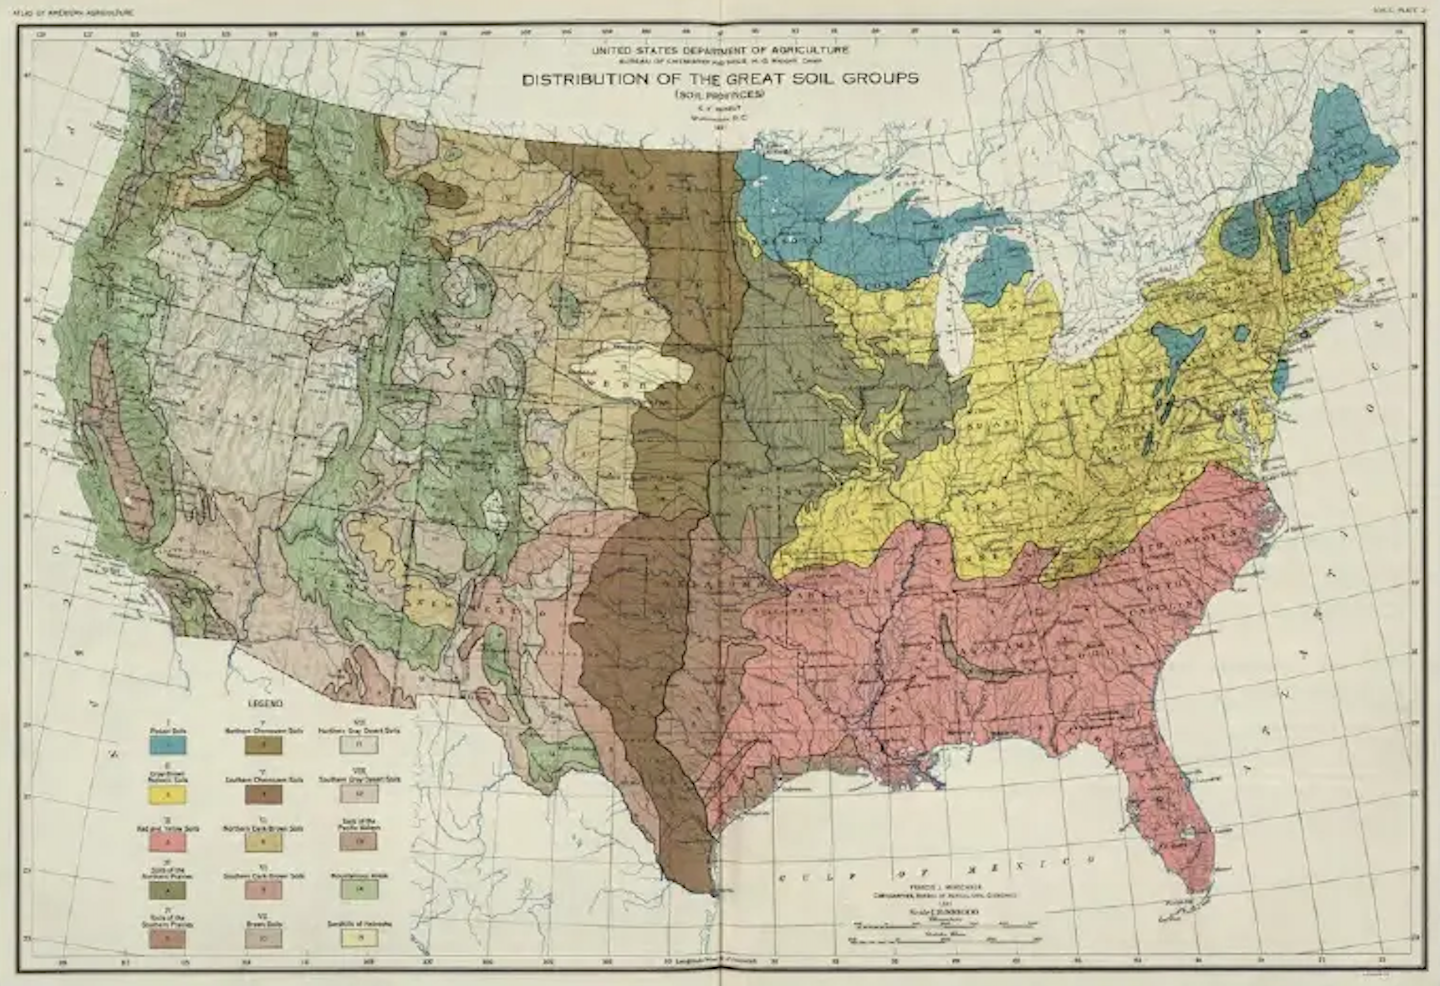 1935 Map showing the ‘Distribution of the Great Soil Groups’ 